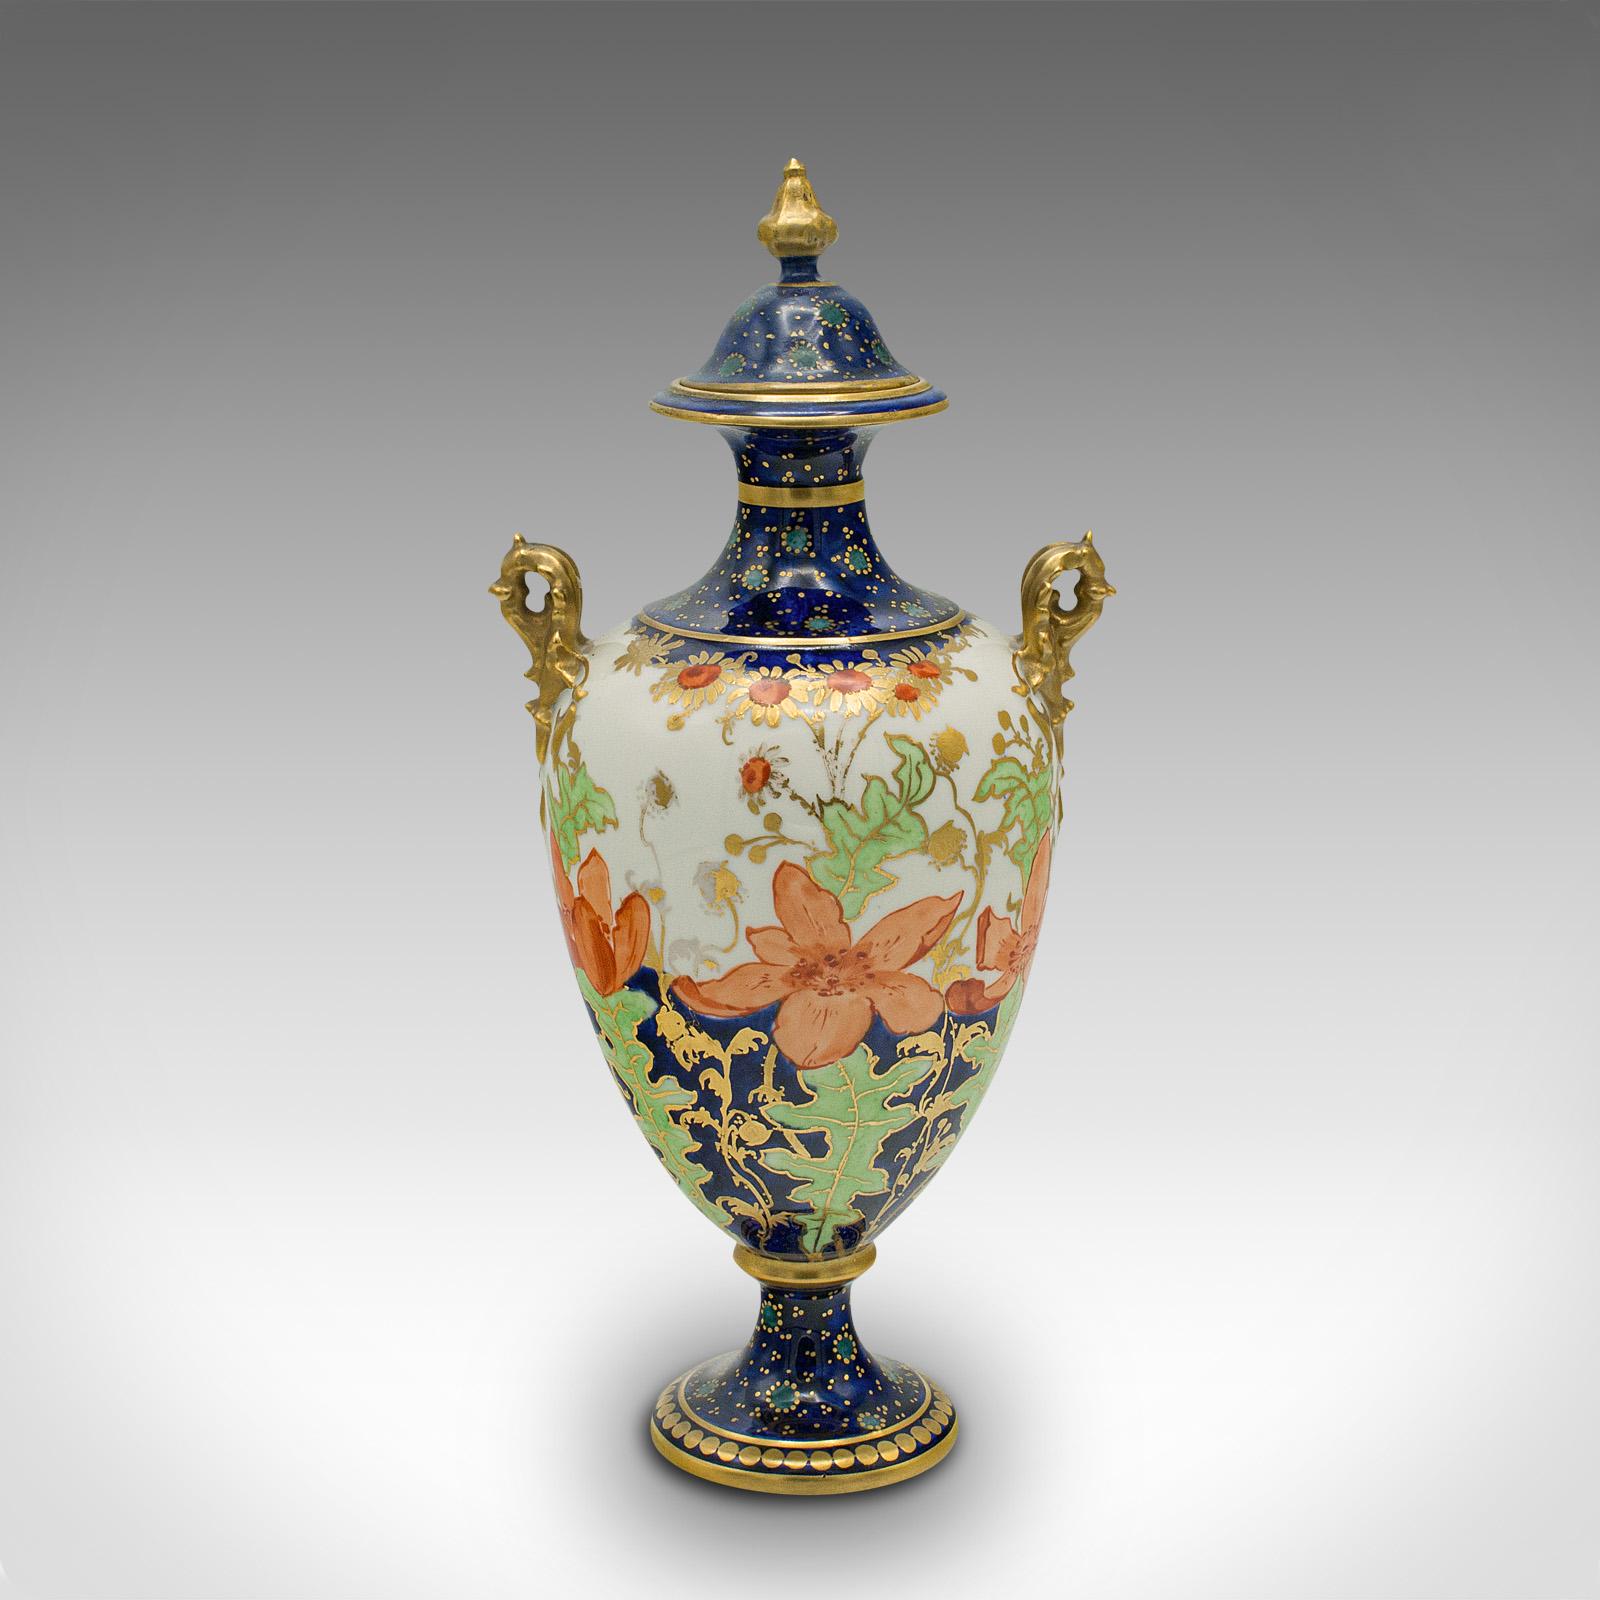 This is a small antique baluster urn. An English, ceramic decorative posy vase by Royal Crown Derby, dating to the late Victorian period, circa 1900.

Of petite form, graced with delightful colour and finish
Displays a desirable aged patina and